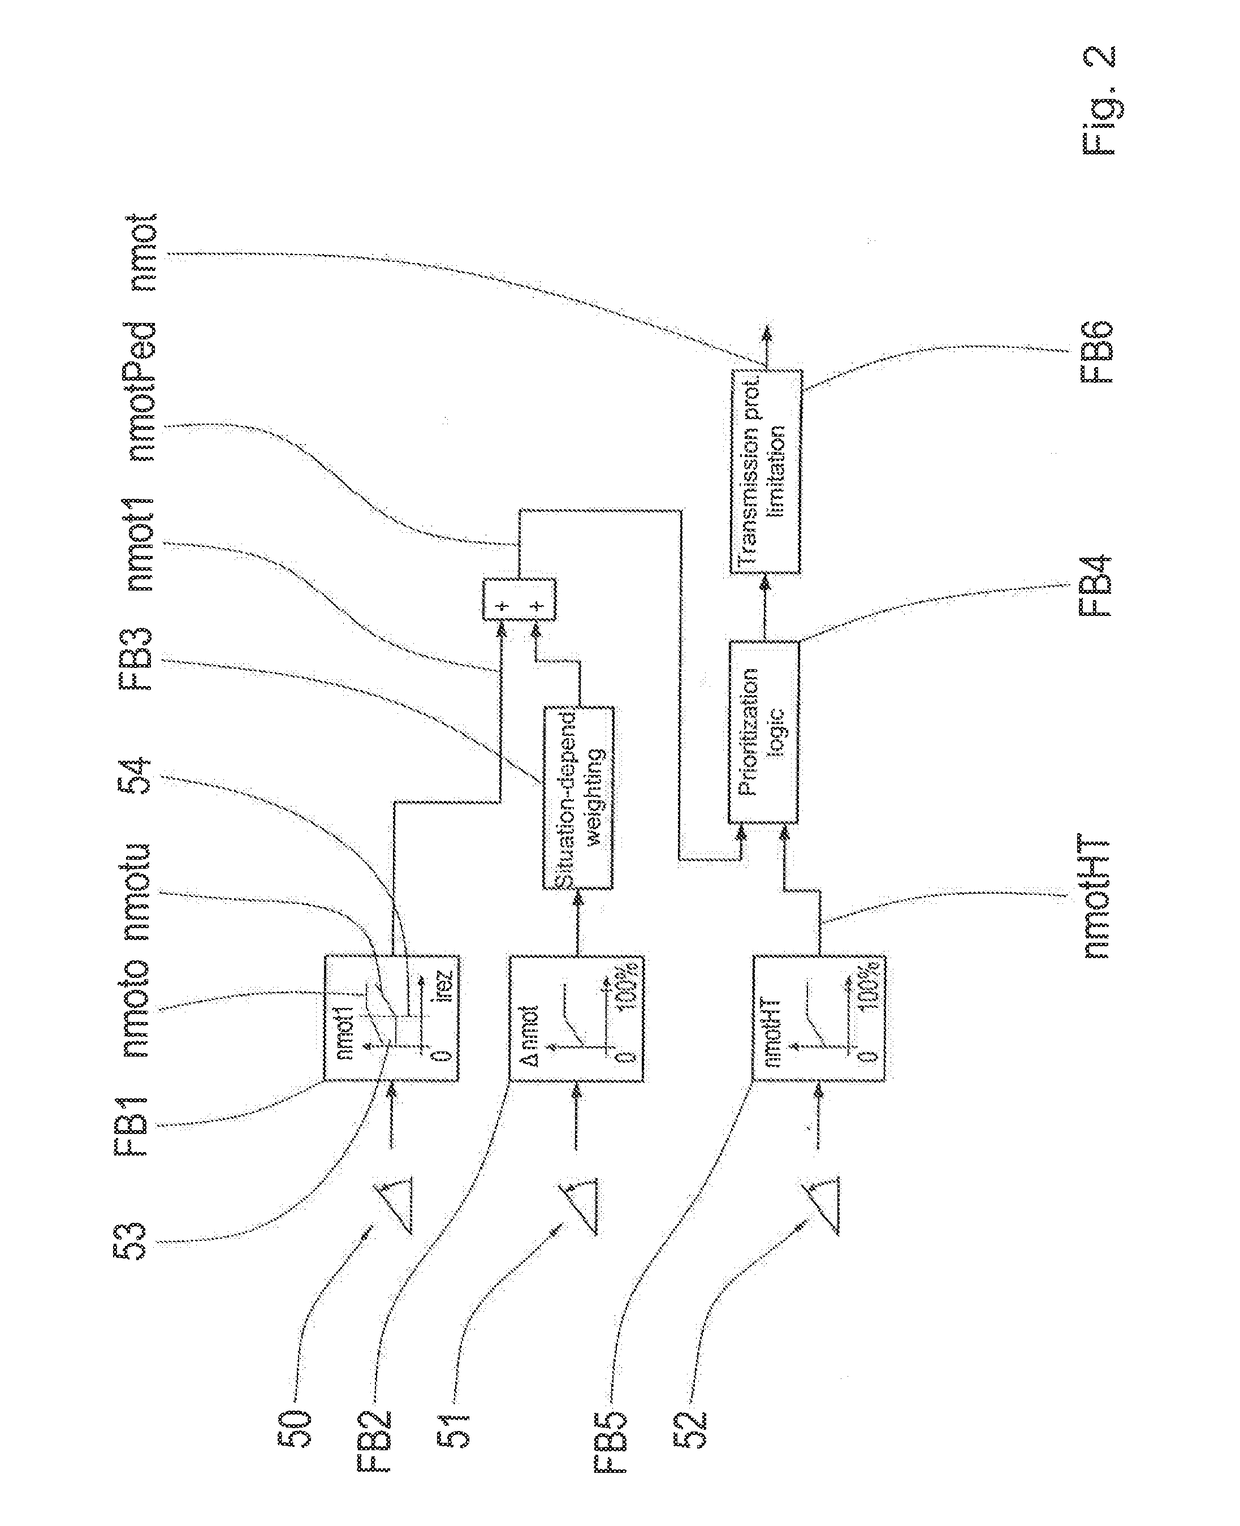 Operating method for a vehicle drive train of a working machine including a drive motor, a transmission and an output